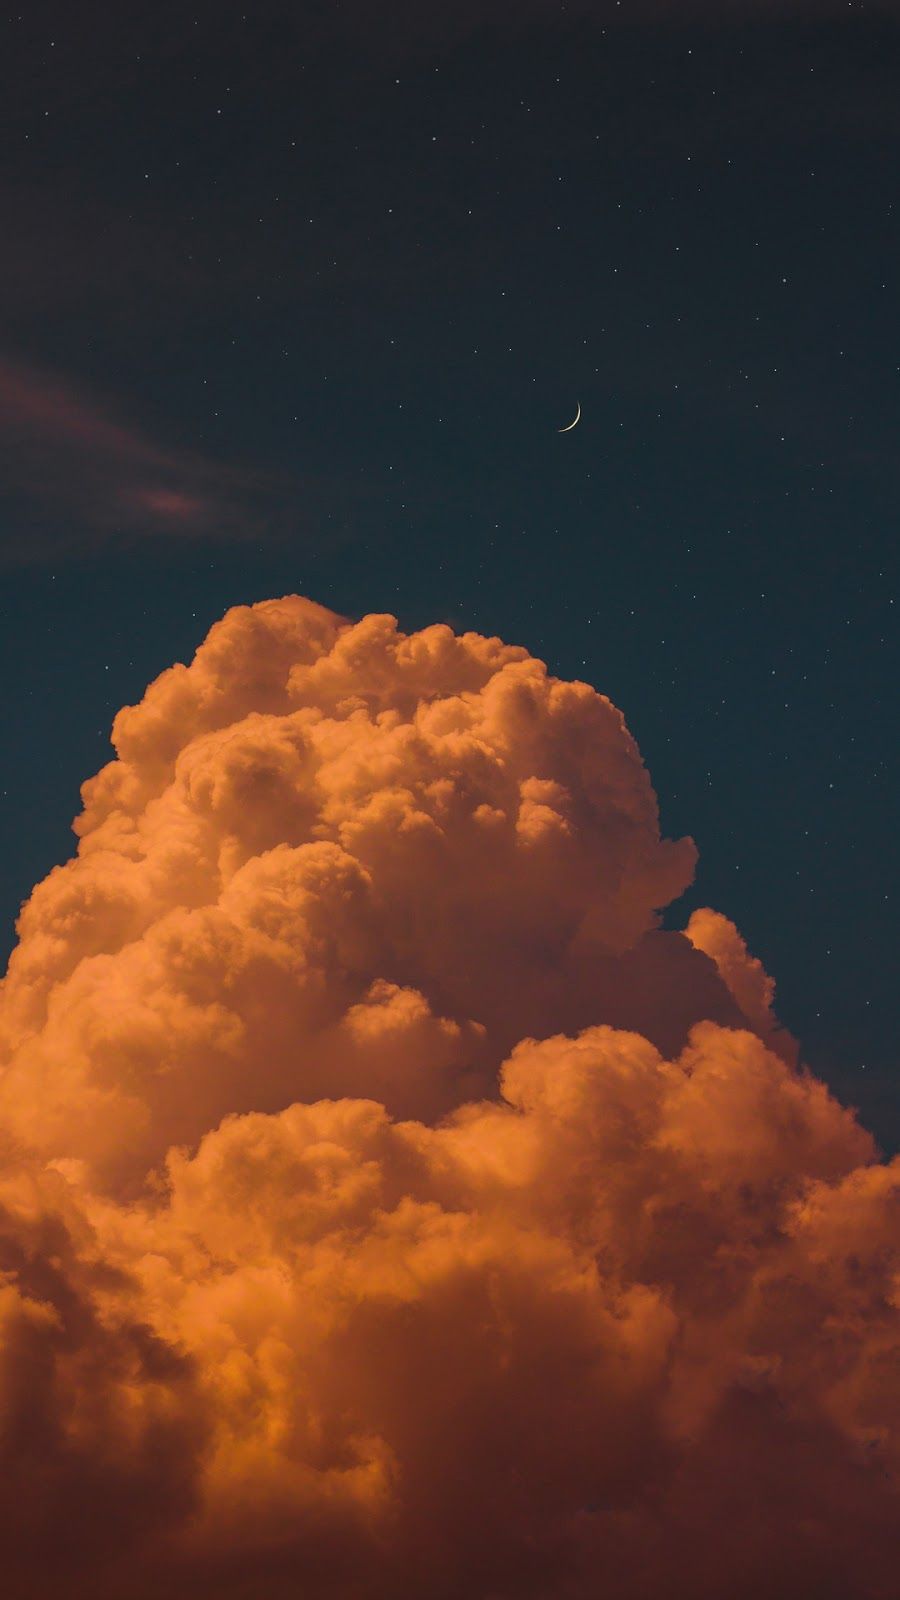 Brightest star in the night sky. Sky aesthetic, Cloud wallpaper